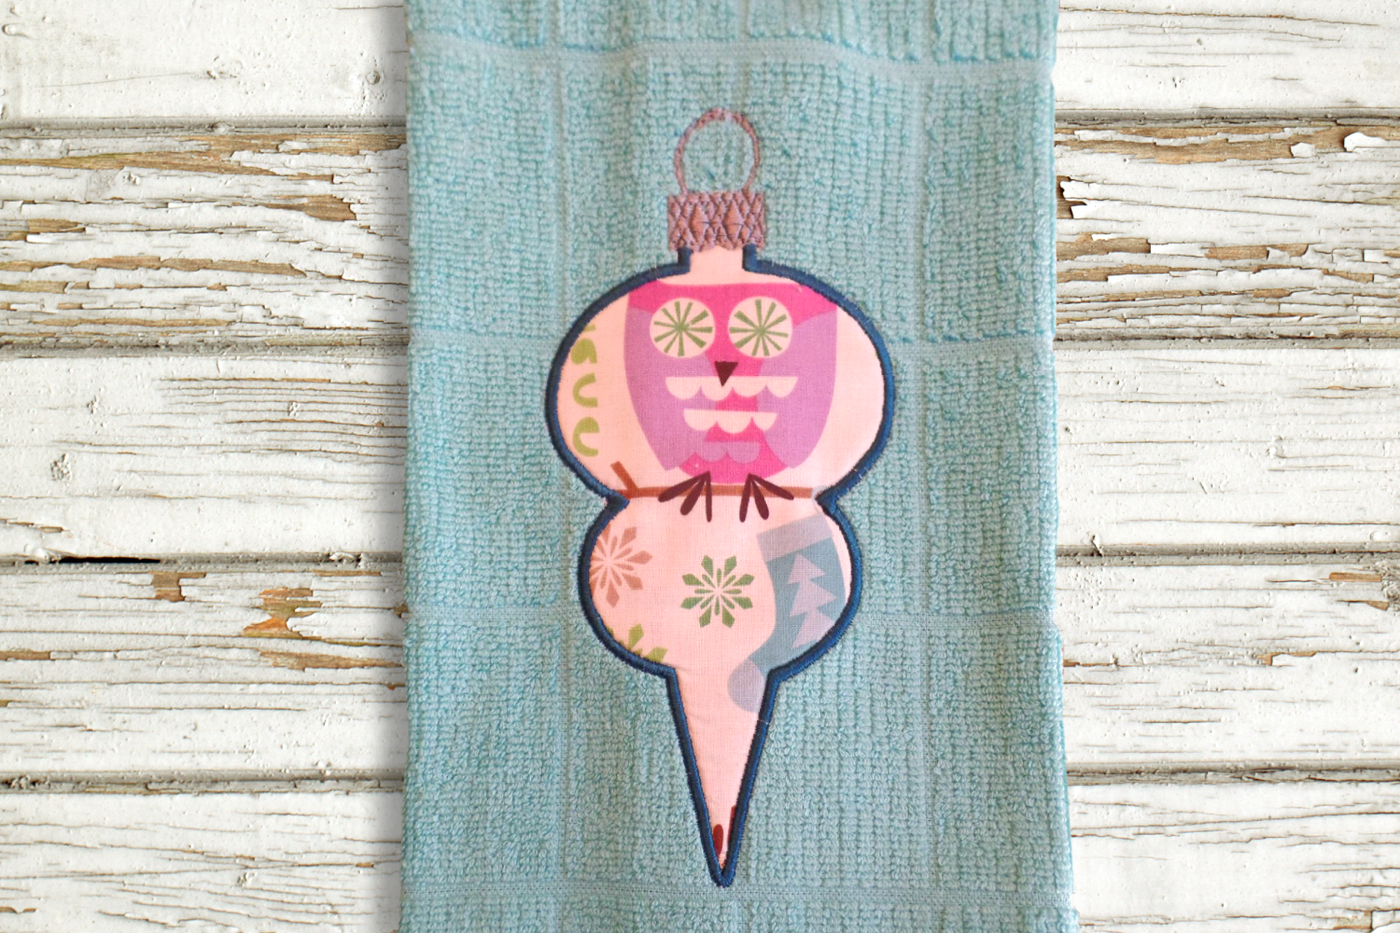 An aqua tea towel lays on a weathered painted wood surface. Appliqued onto the towel is an old fashioned Christmas ornament done in a retro owl holiday fabric.